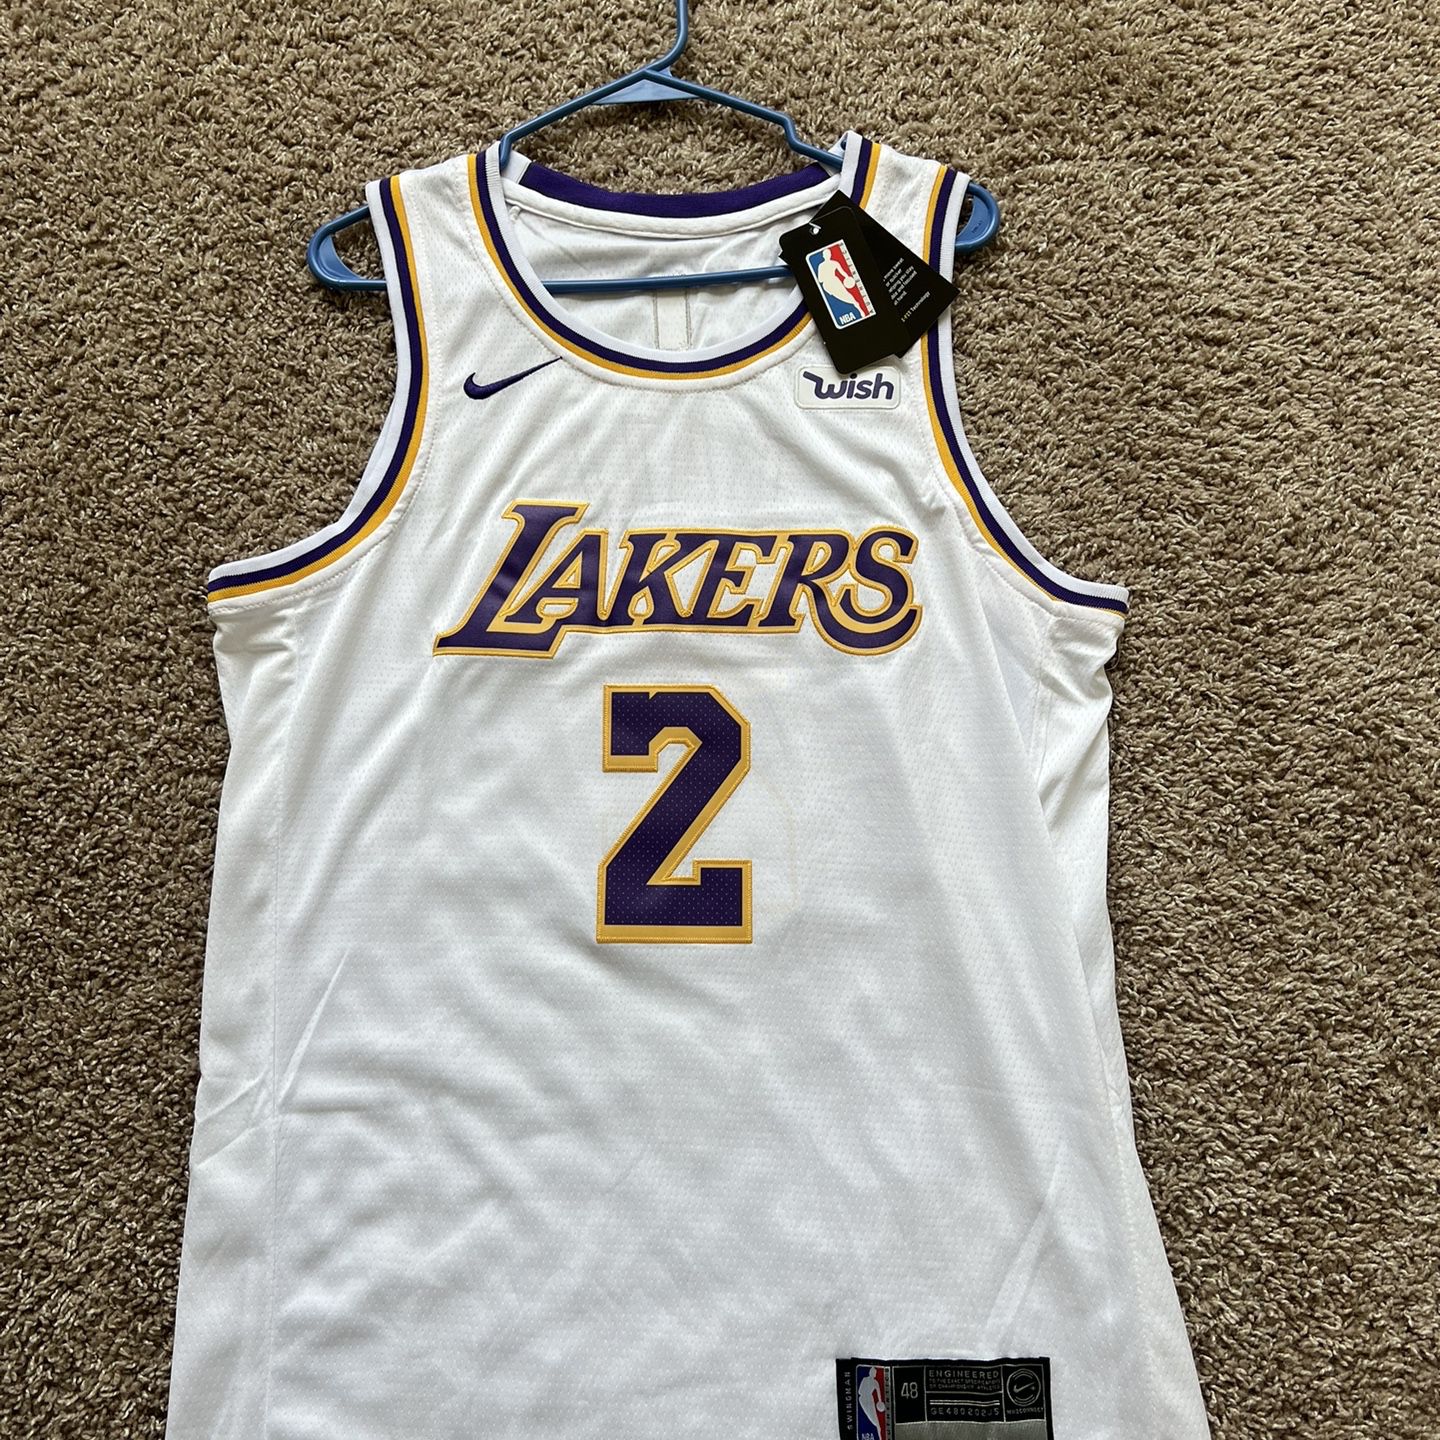 Los Angeles Lakers Lonzo Ball Jersey for Sale in San Diego, CA - OfferUp